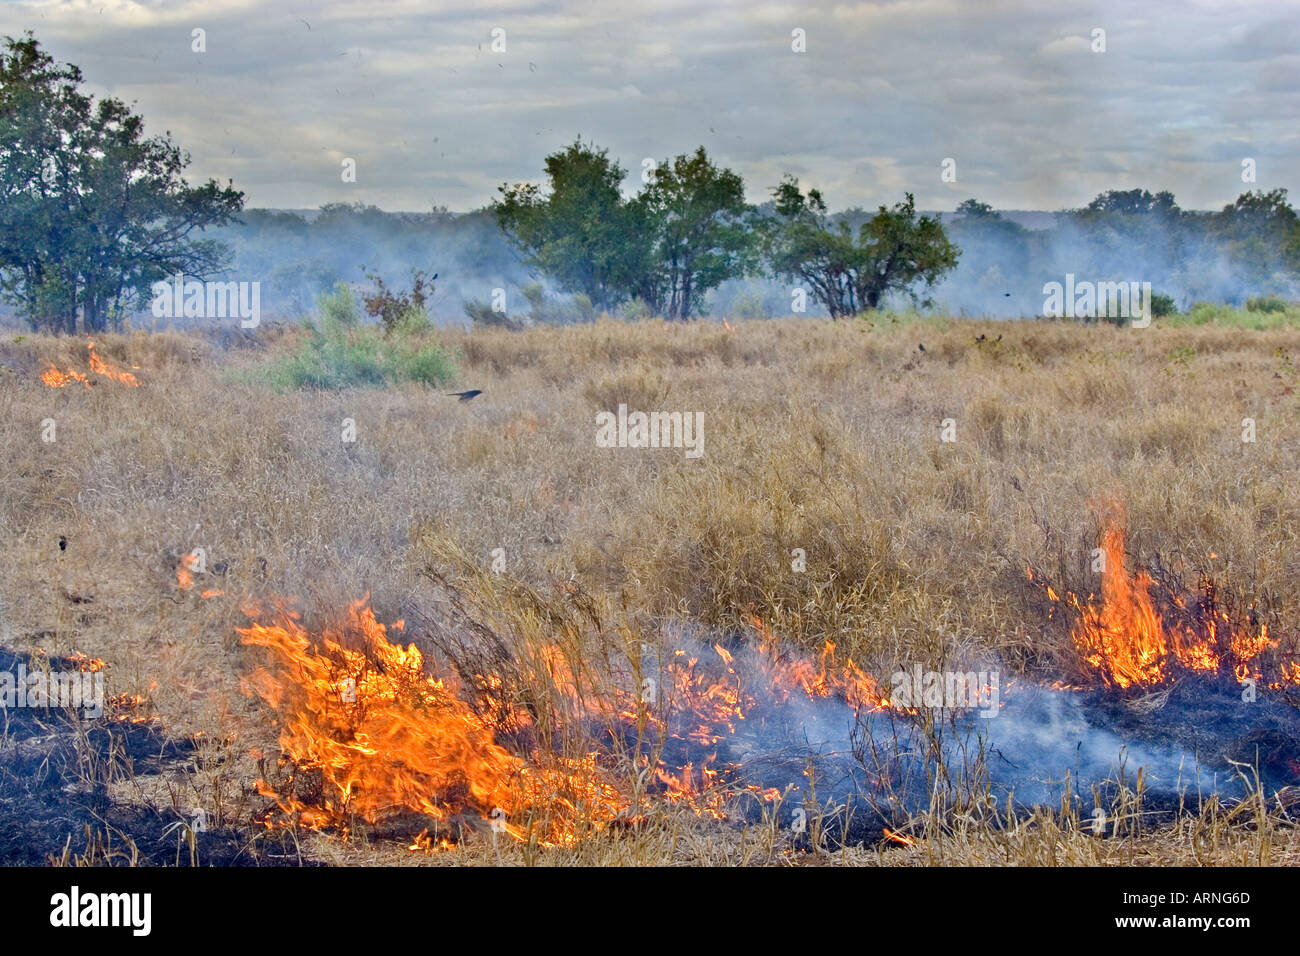 fire, steppe fire, South Africa, Kruger NP, Jul 05. Stock Photo